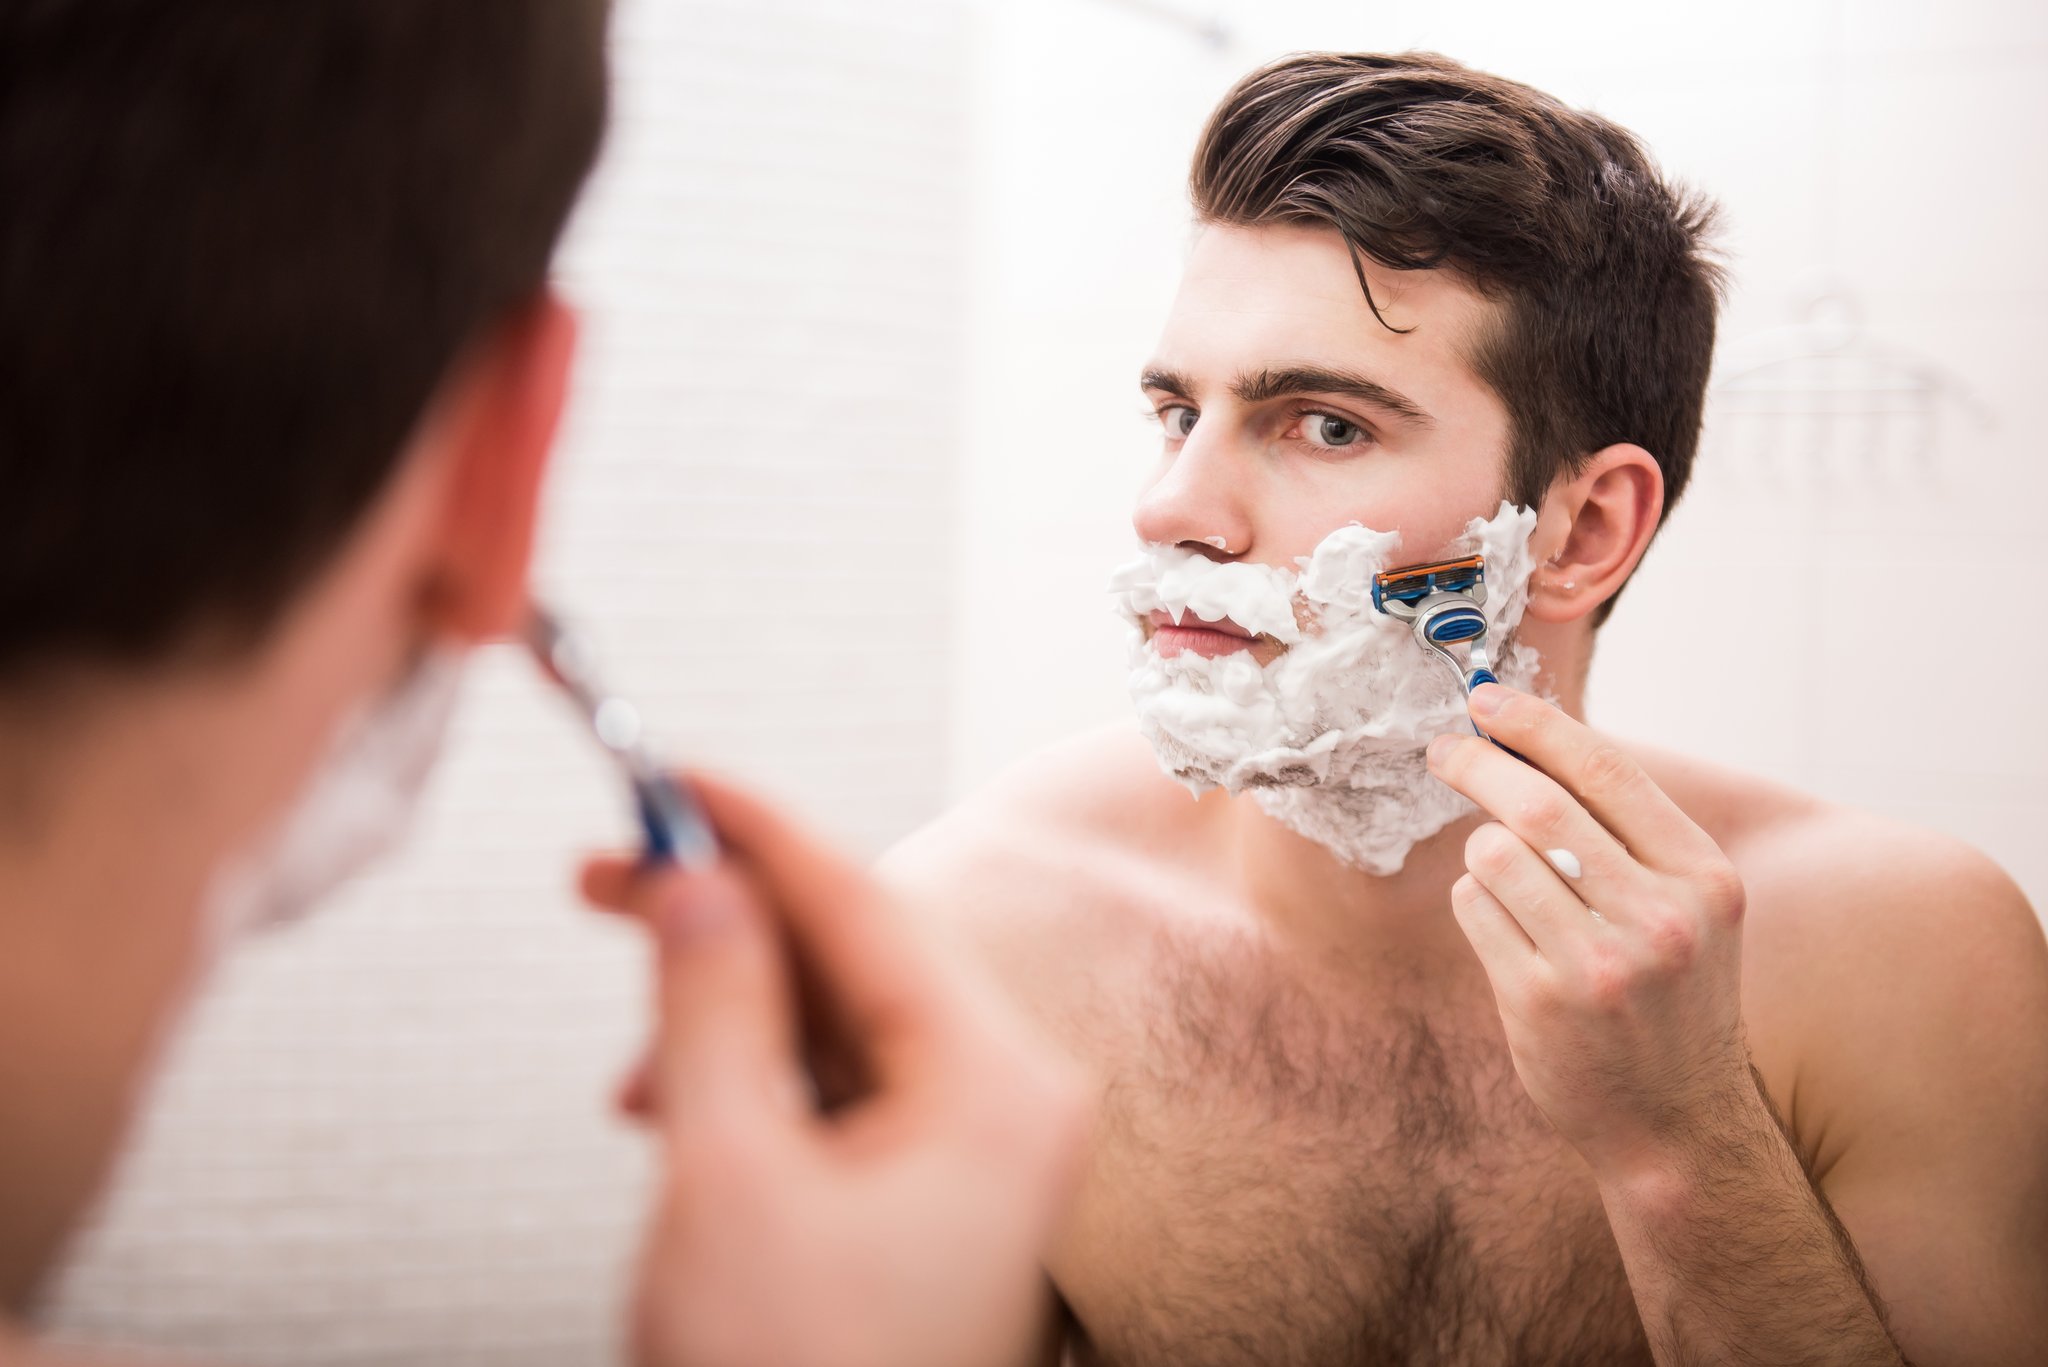 Important Tips to Consider When Shaving